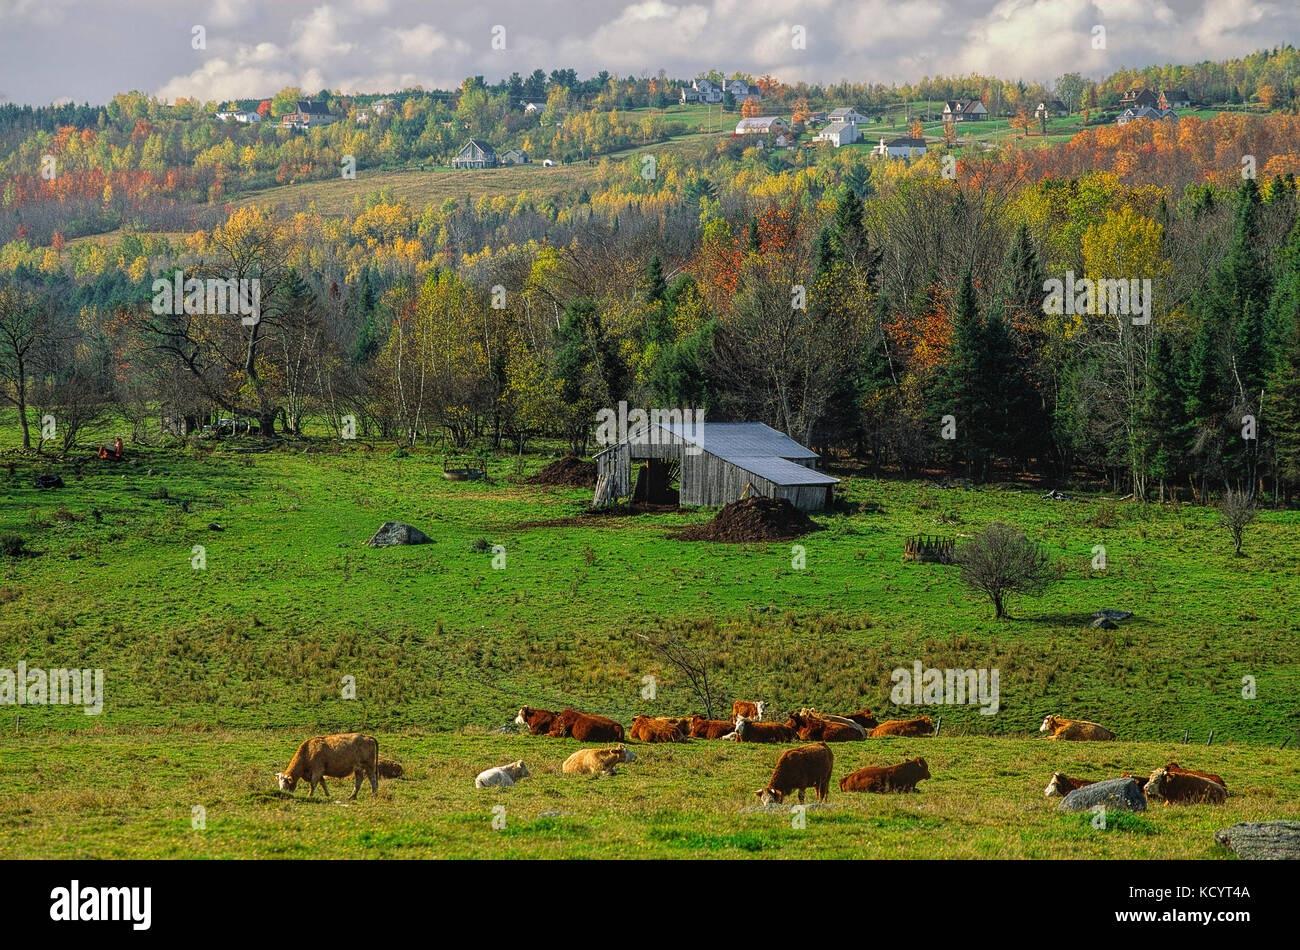 Cows in a field with countryside houses in the background, Eastern-Townships, Sherbrooke, Québec, Canada Stock Photo